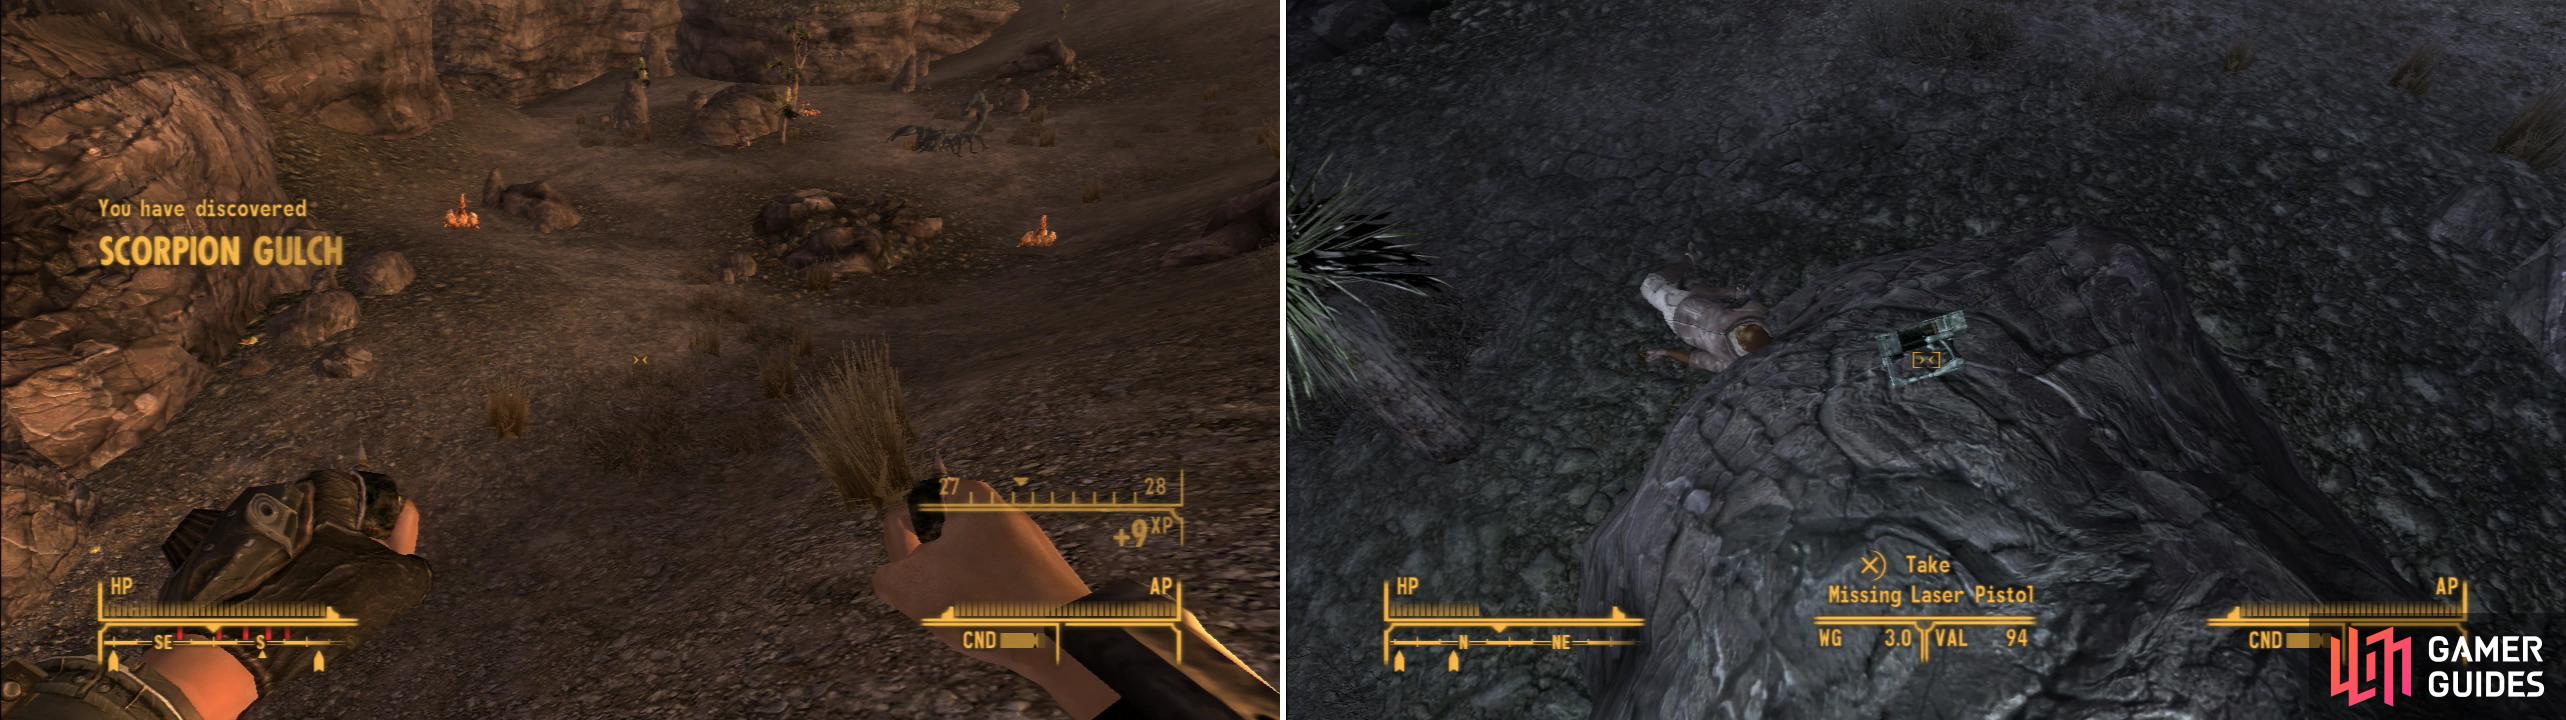 In Scorpion Gulch you’ll find… what else? Scorpions (left). On a rock you’ll find the misplaced Laser Pistol (right).